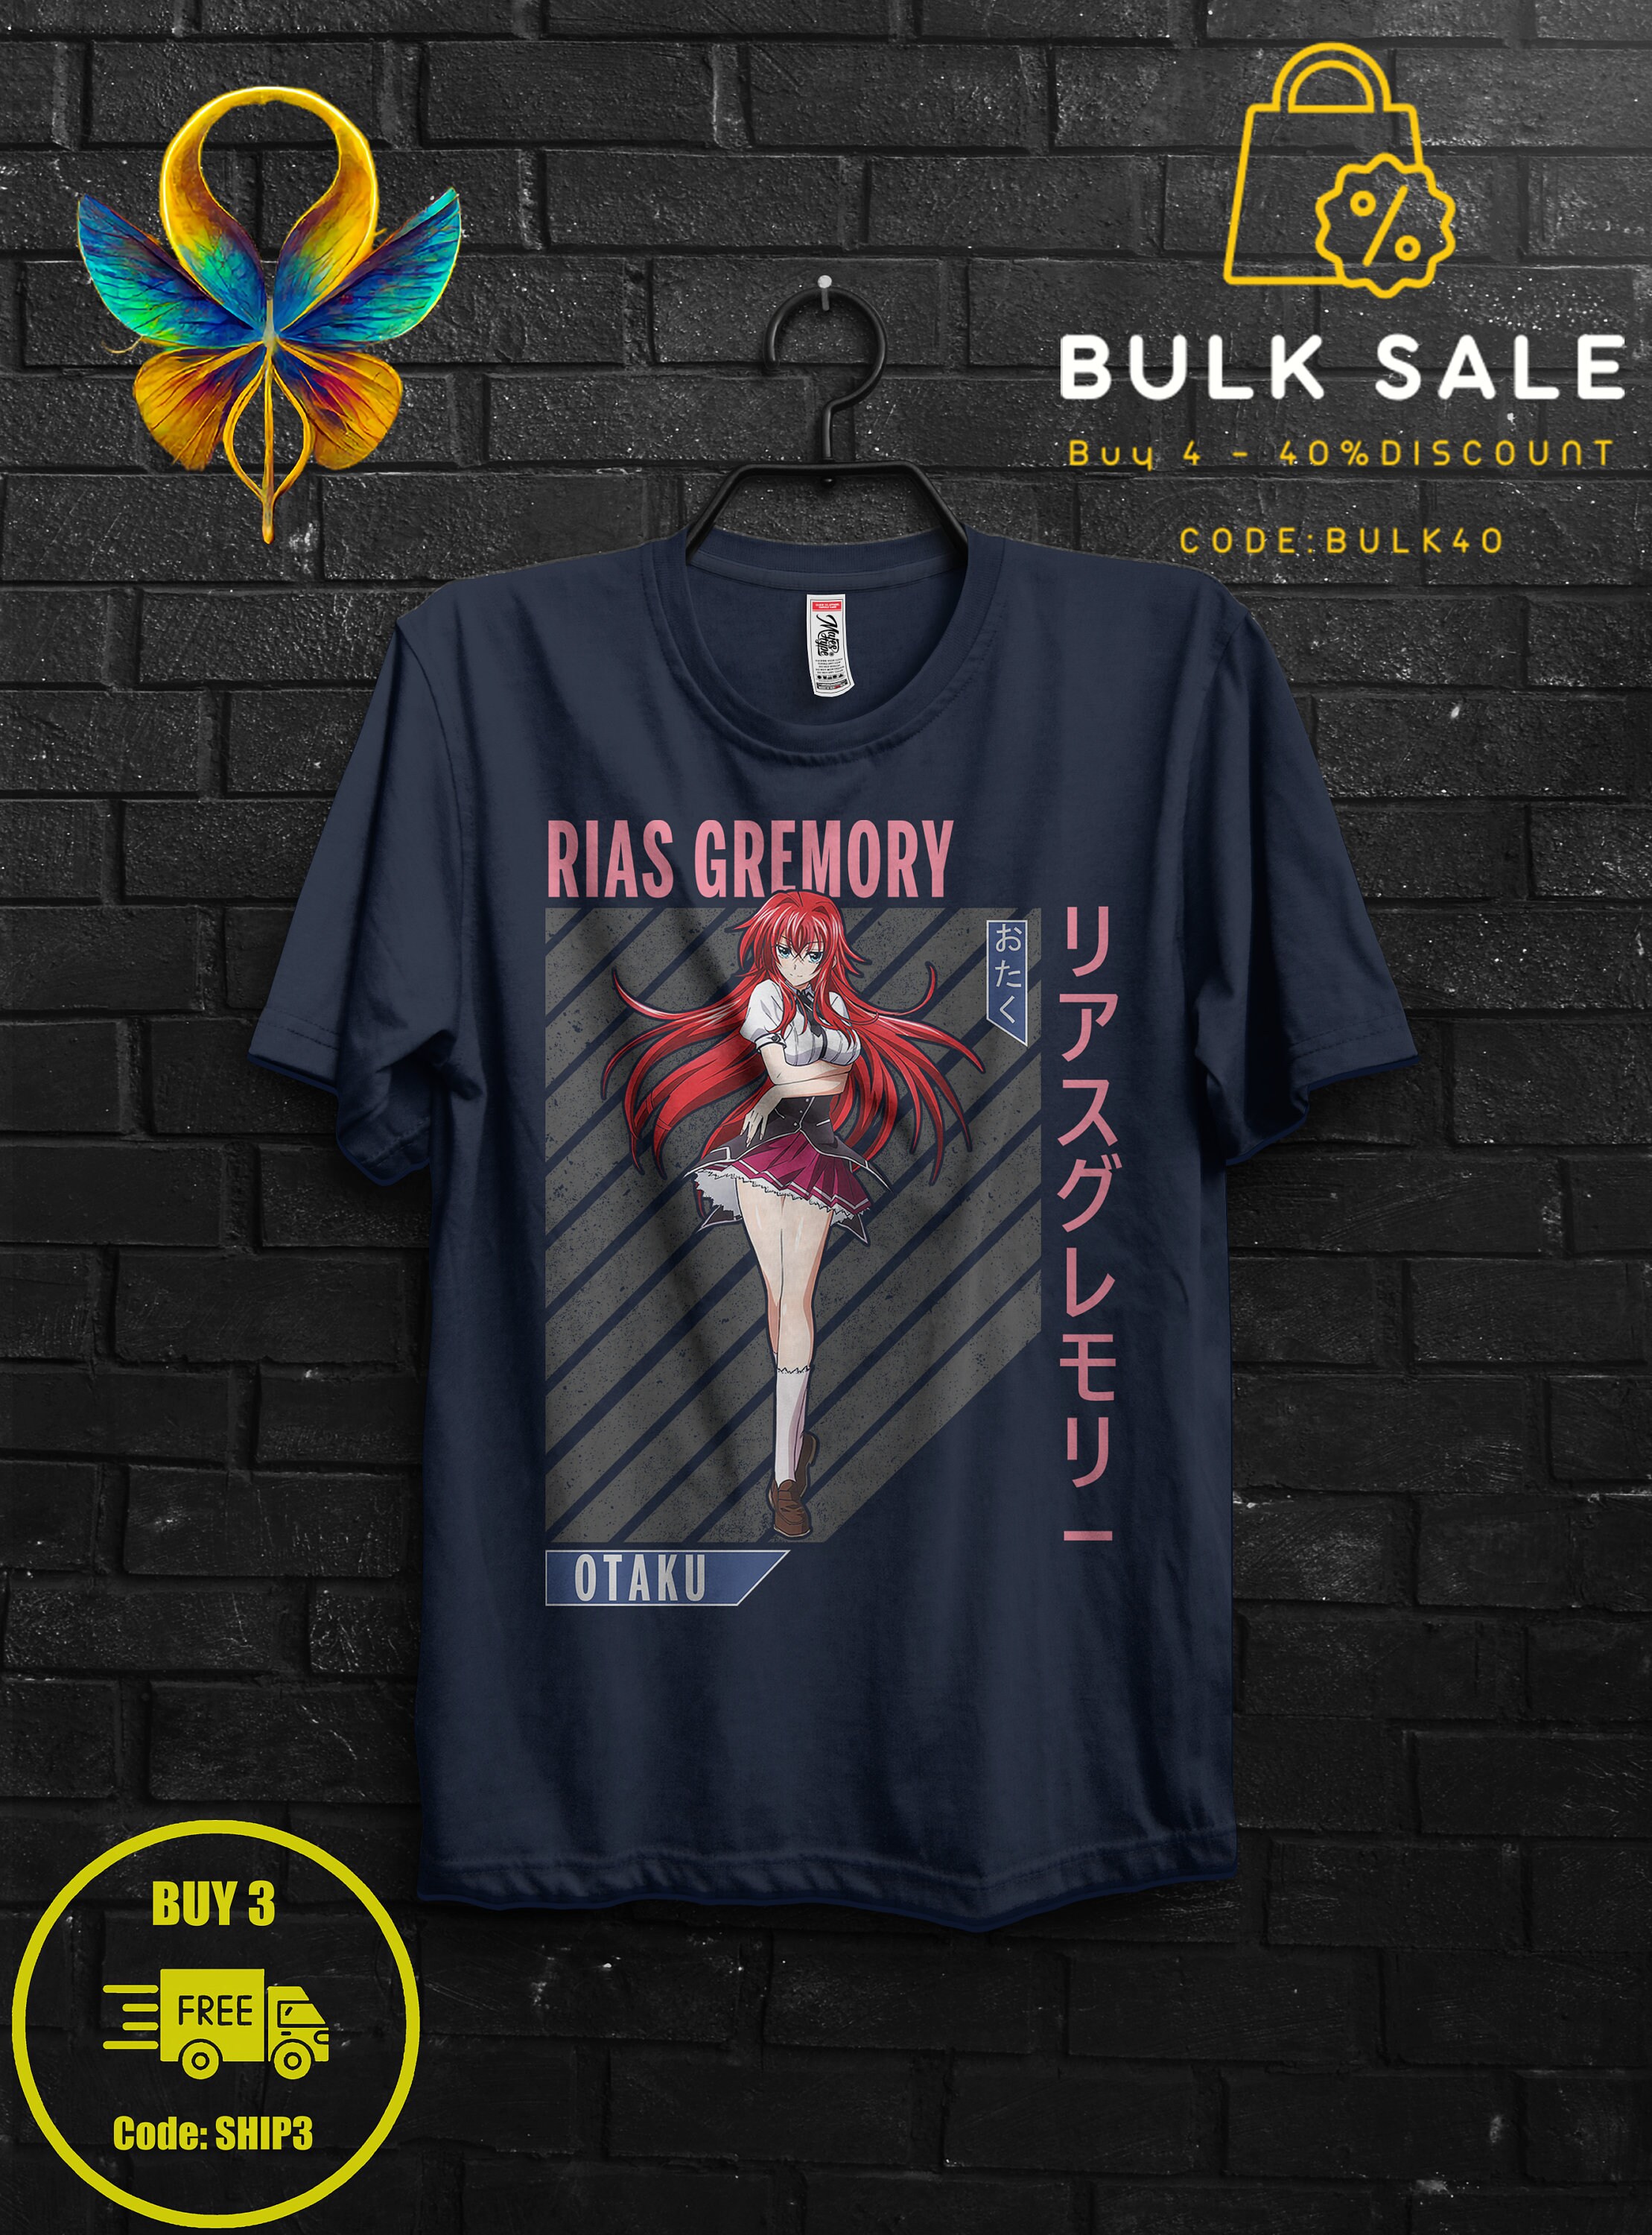 Rias Gremory Shirt Anime Gift Cosplay For Girl,Xenovia Appareal For Her,Rossweisse Tshirt For Sitri,High School DxD Tee,Issei Hyoudou Sweat 1600240769